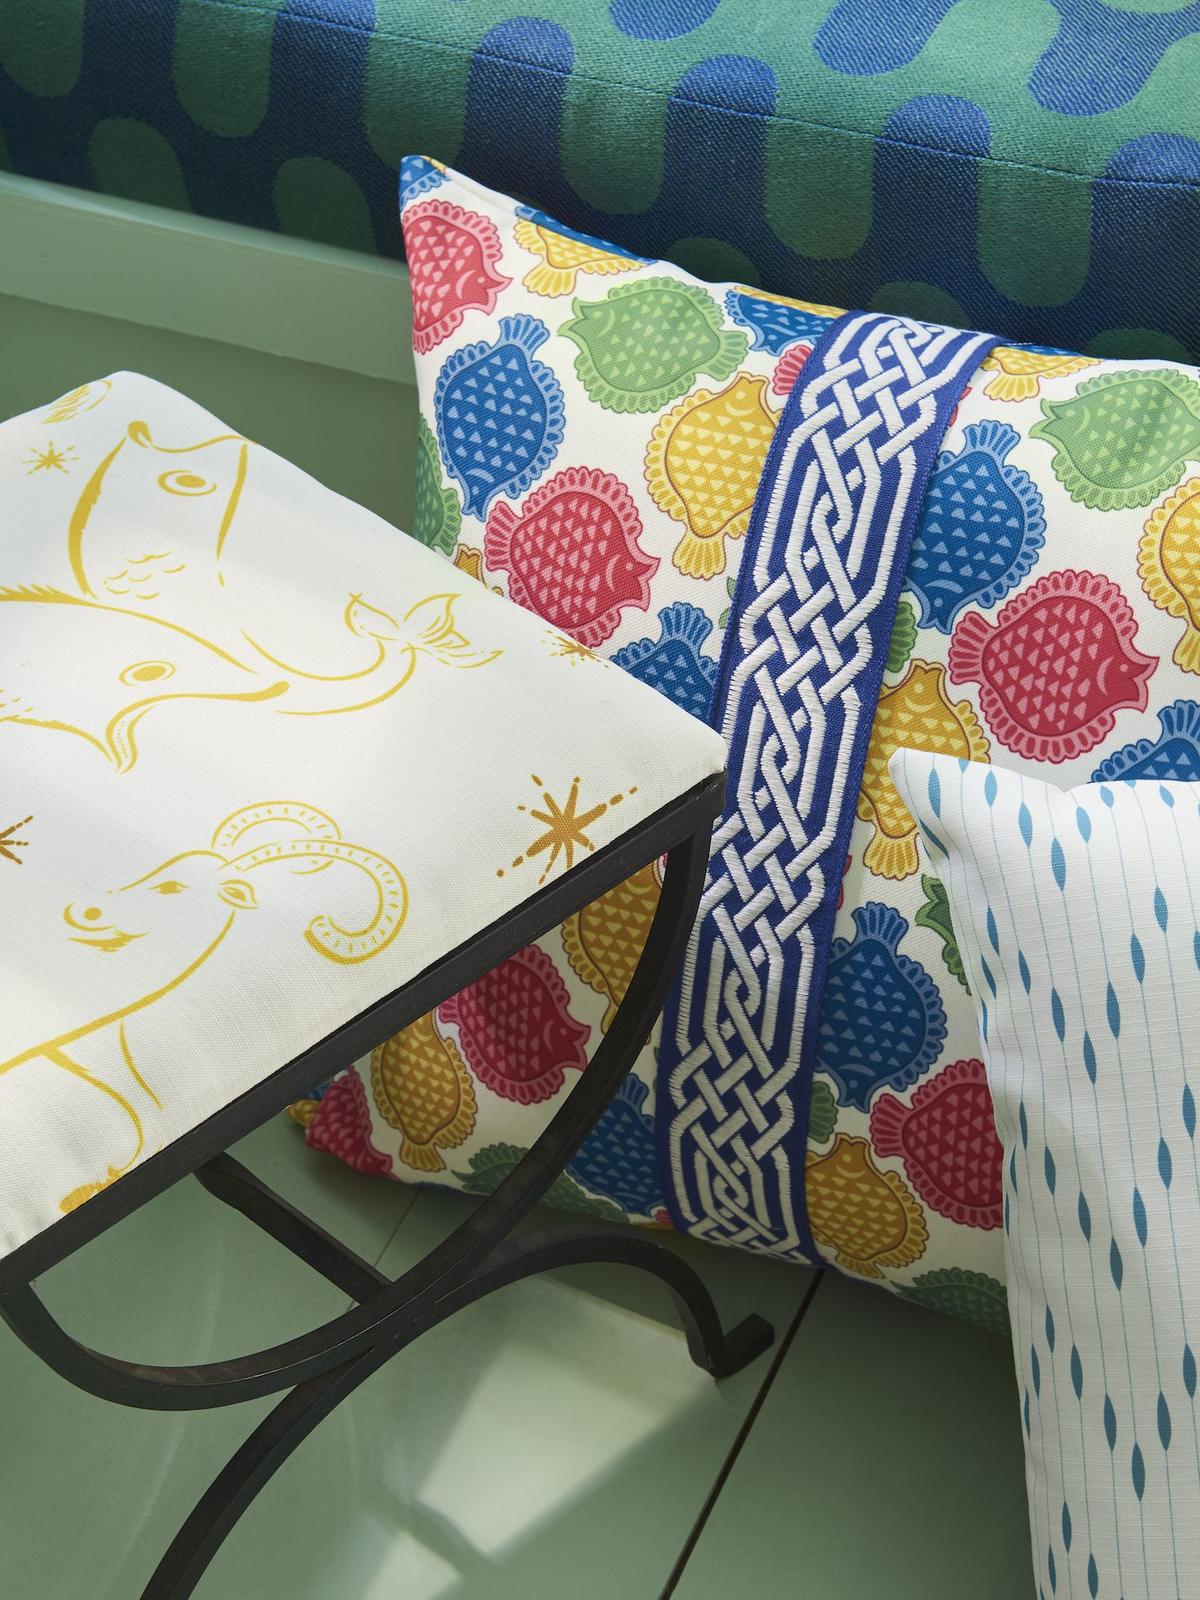 New and noteworthy designs from Thibaut, Porter Teleo and more